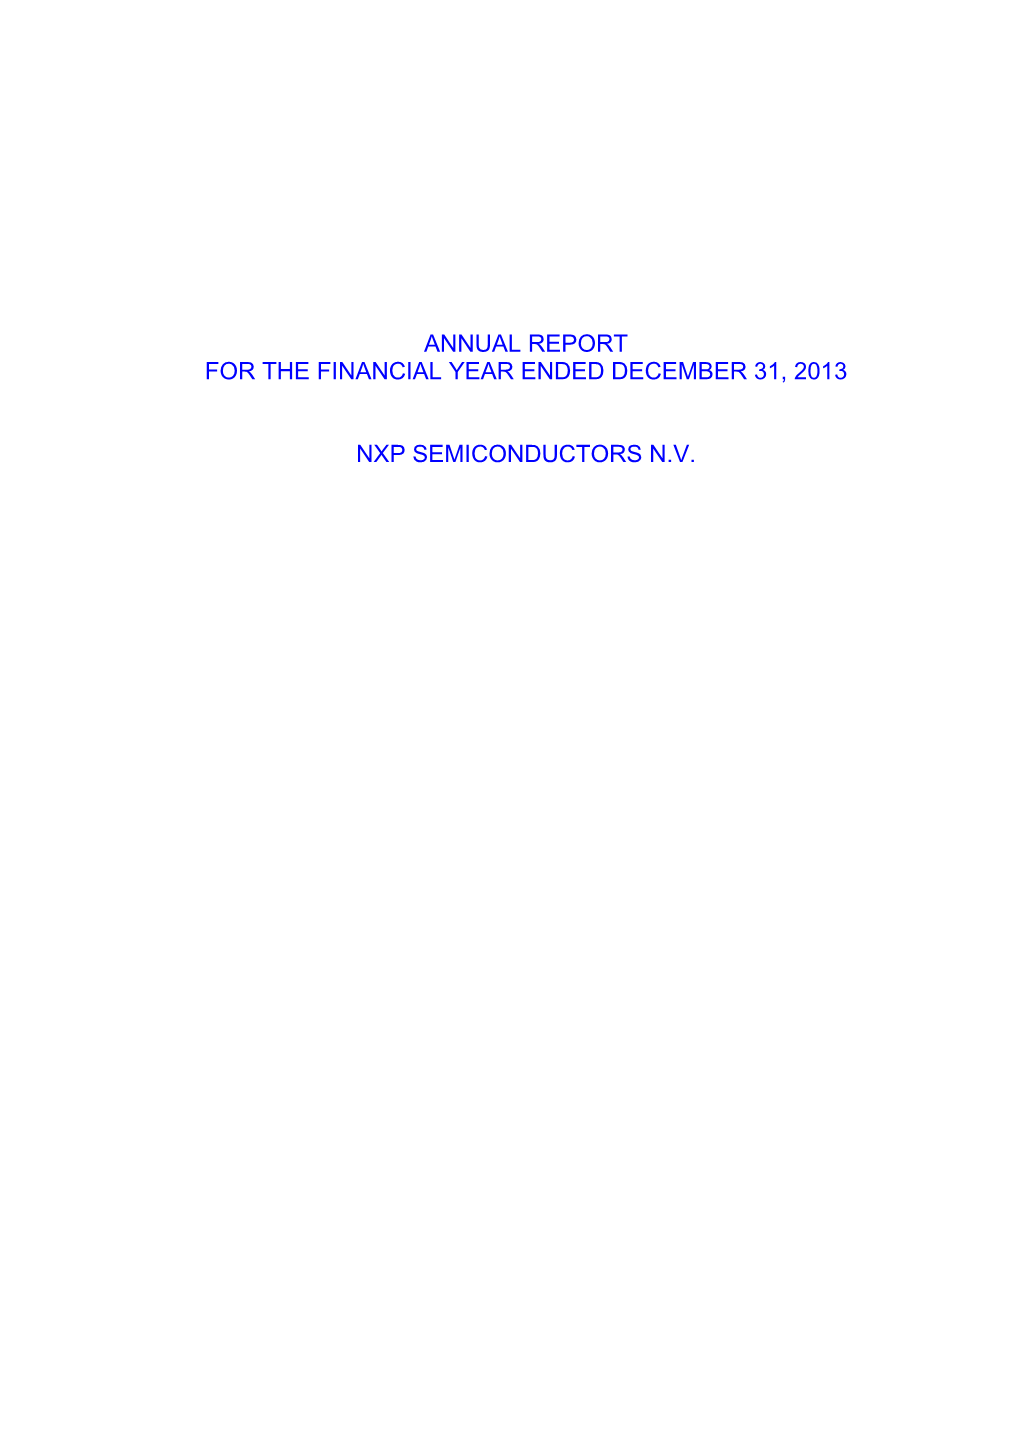 Annual Report for the Financial Year Ended December 31, 2013